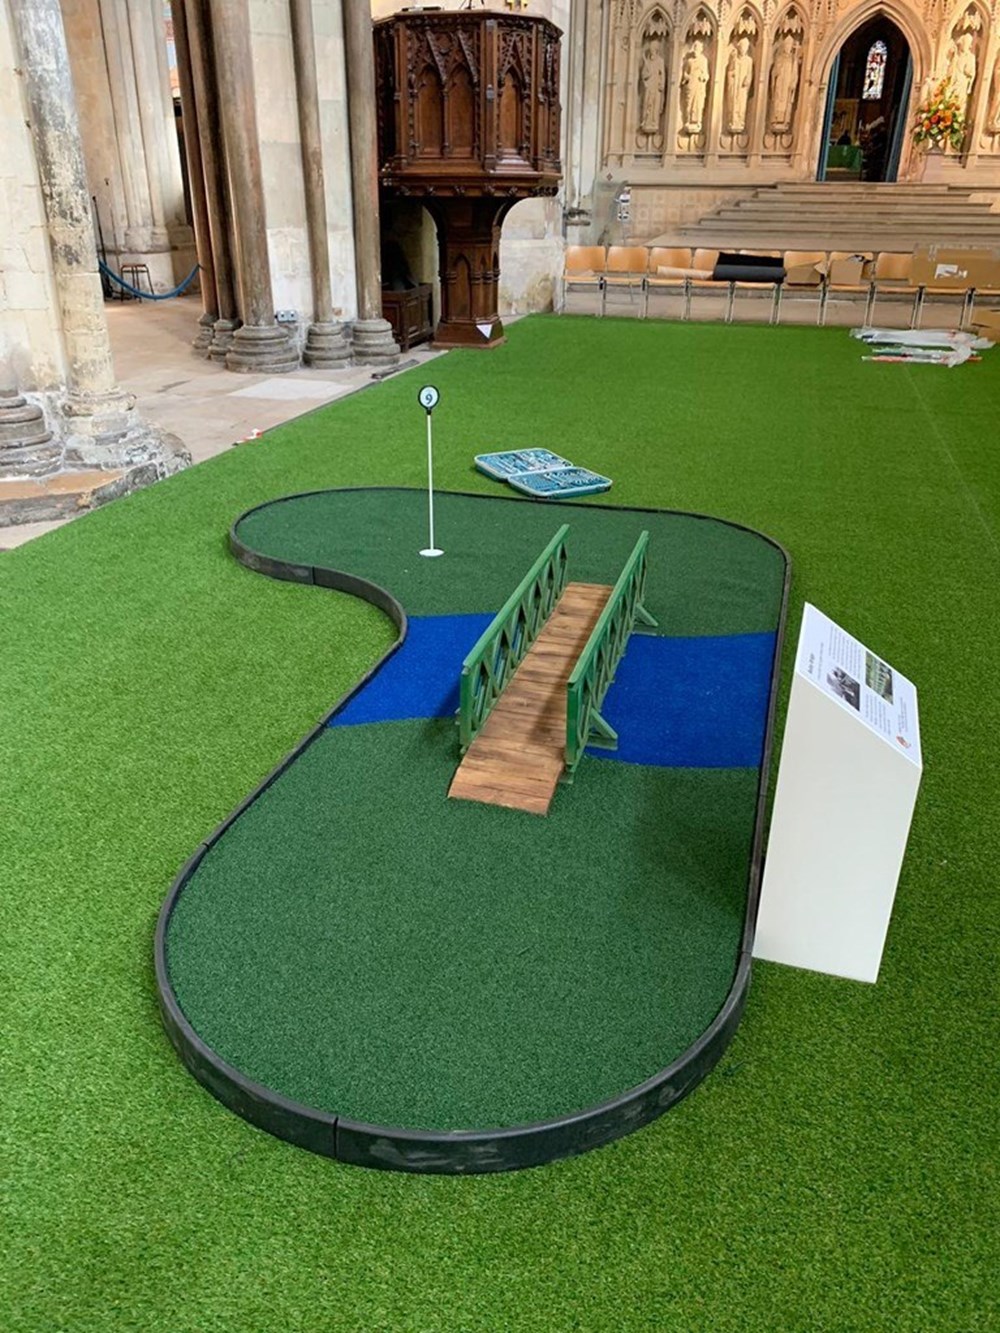 Old man ATTACKS lady chaplain in row over crazy golf at cathedral